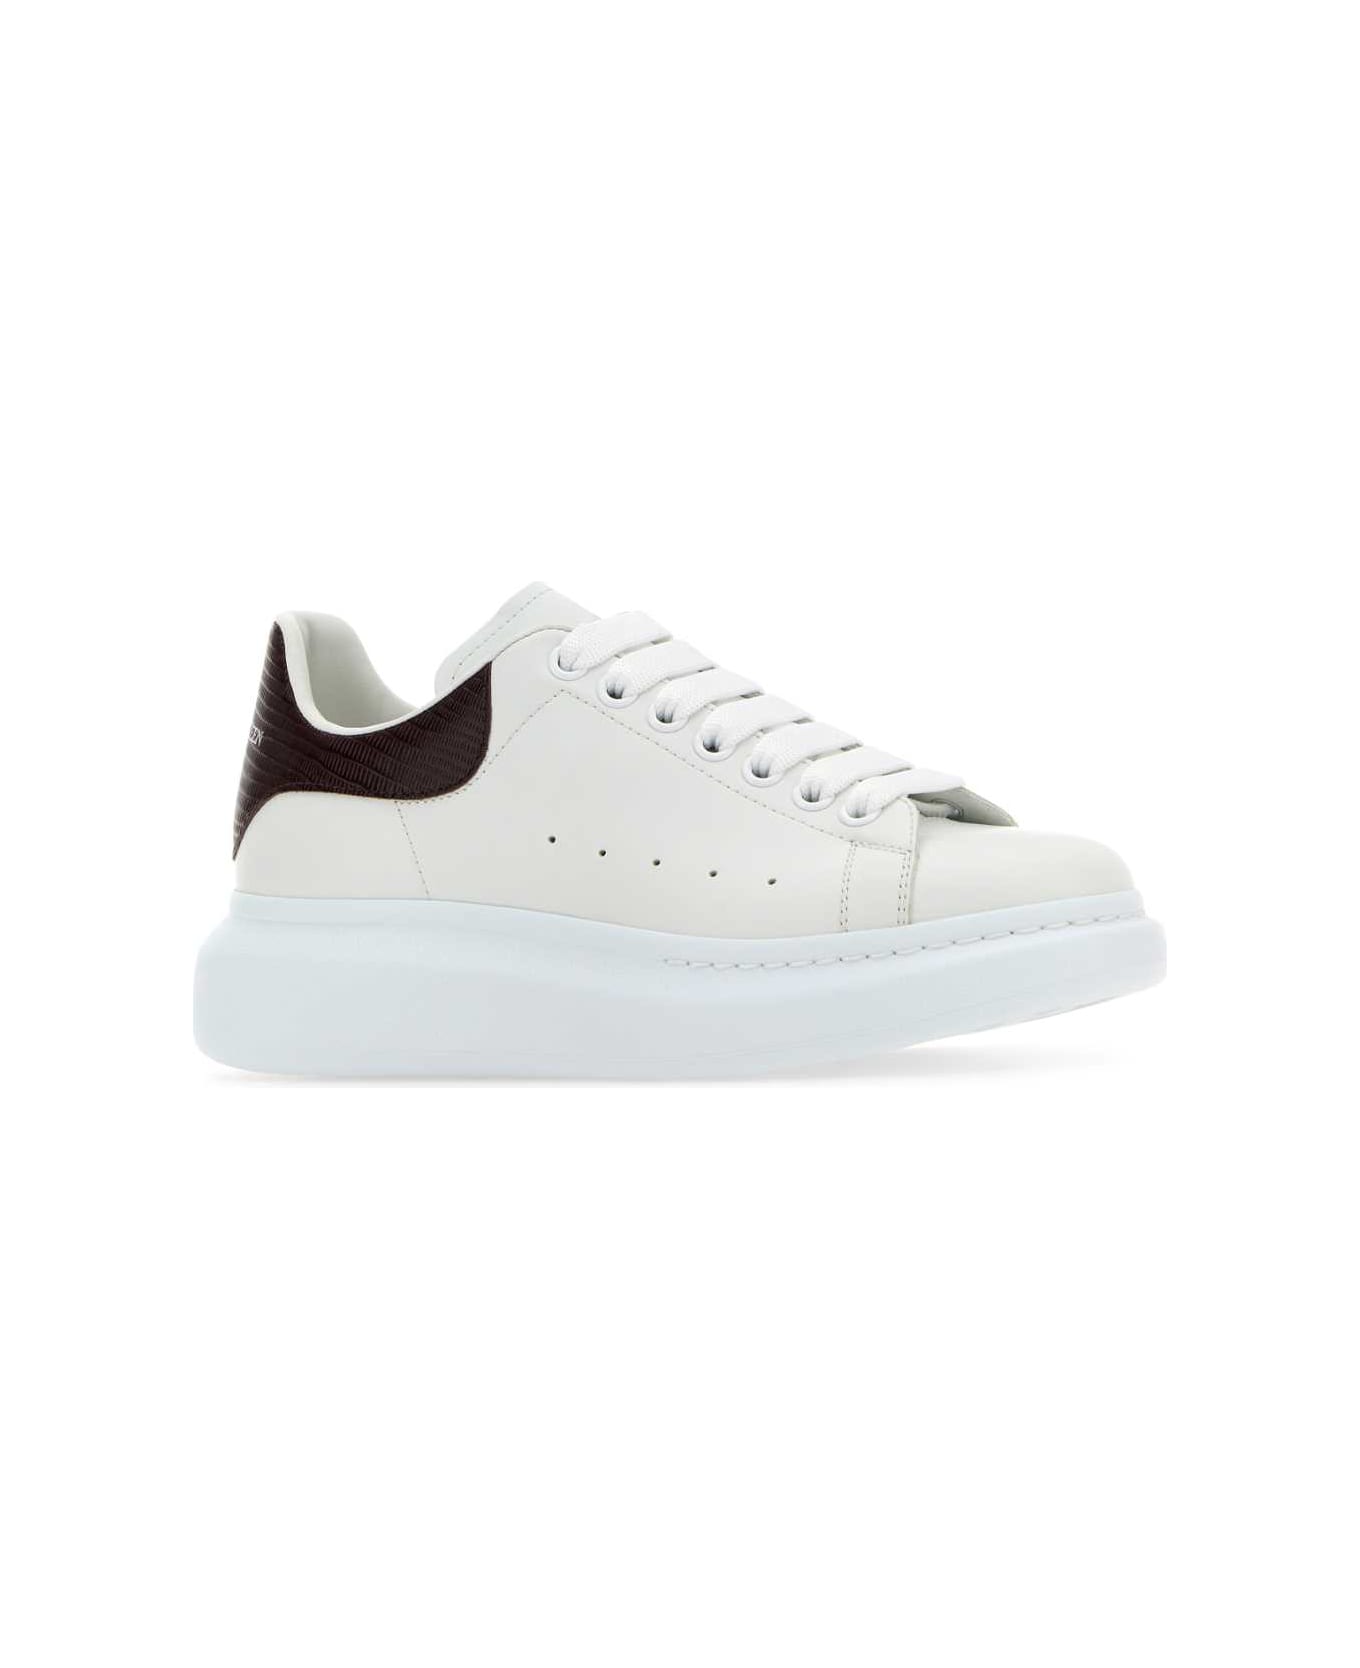 Alexander McQueen White Leather Sneakers With Burgundy Leather Heel - WHITEBURGUNDY